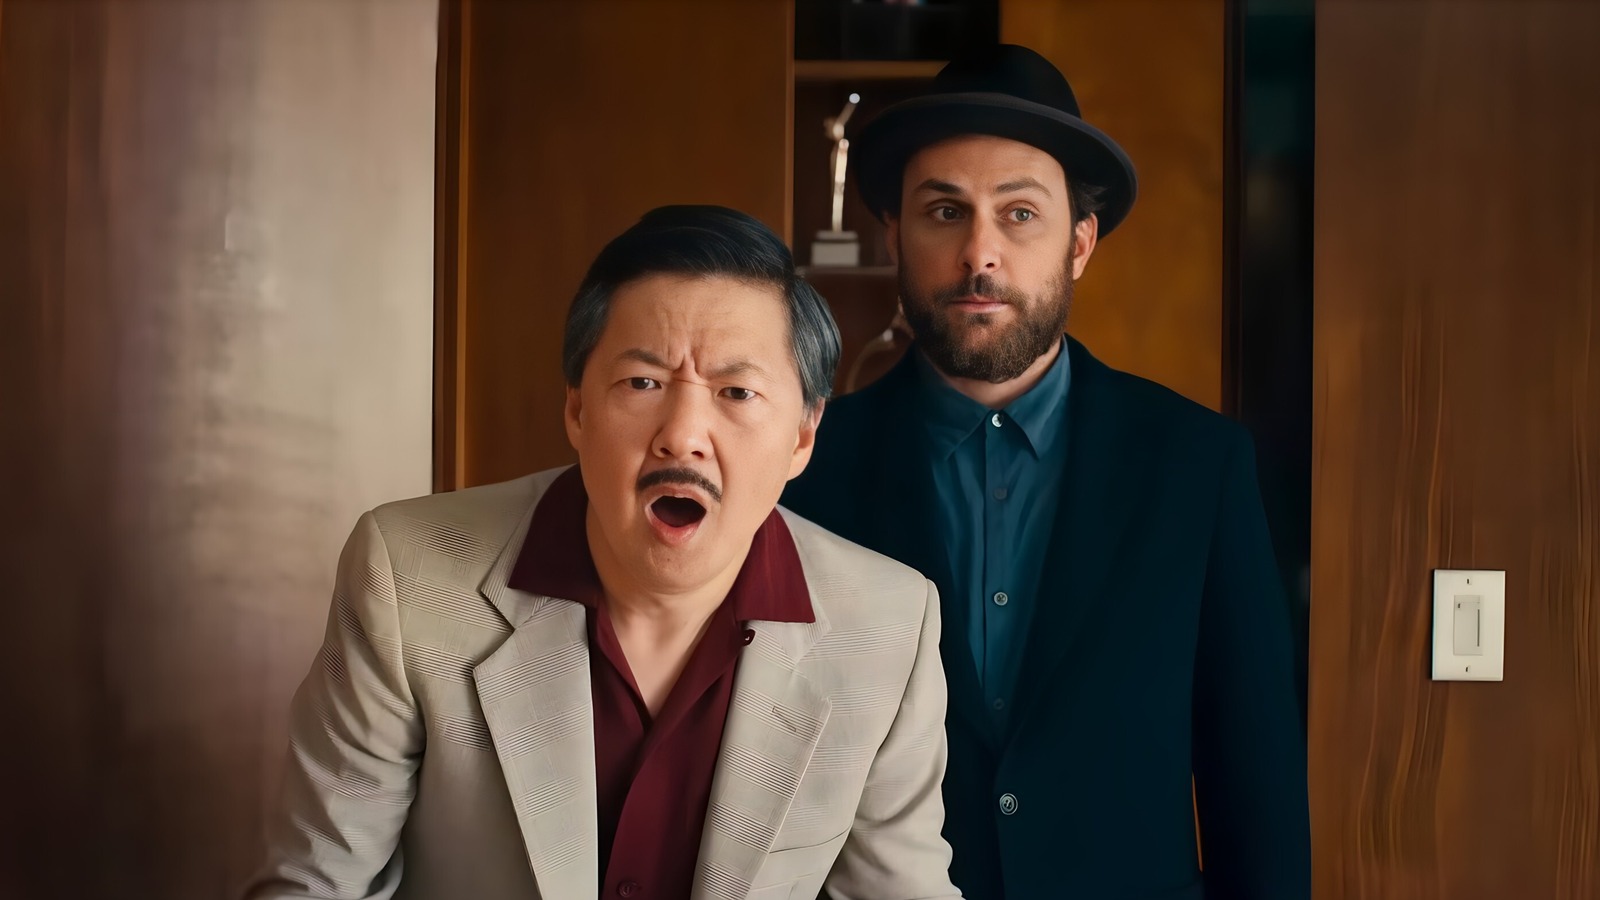 Fool's Paradise (Charlie Day, Ken Jeong) Movie POSTER - Lost Posters